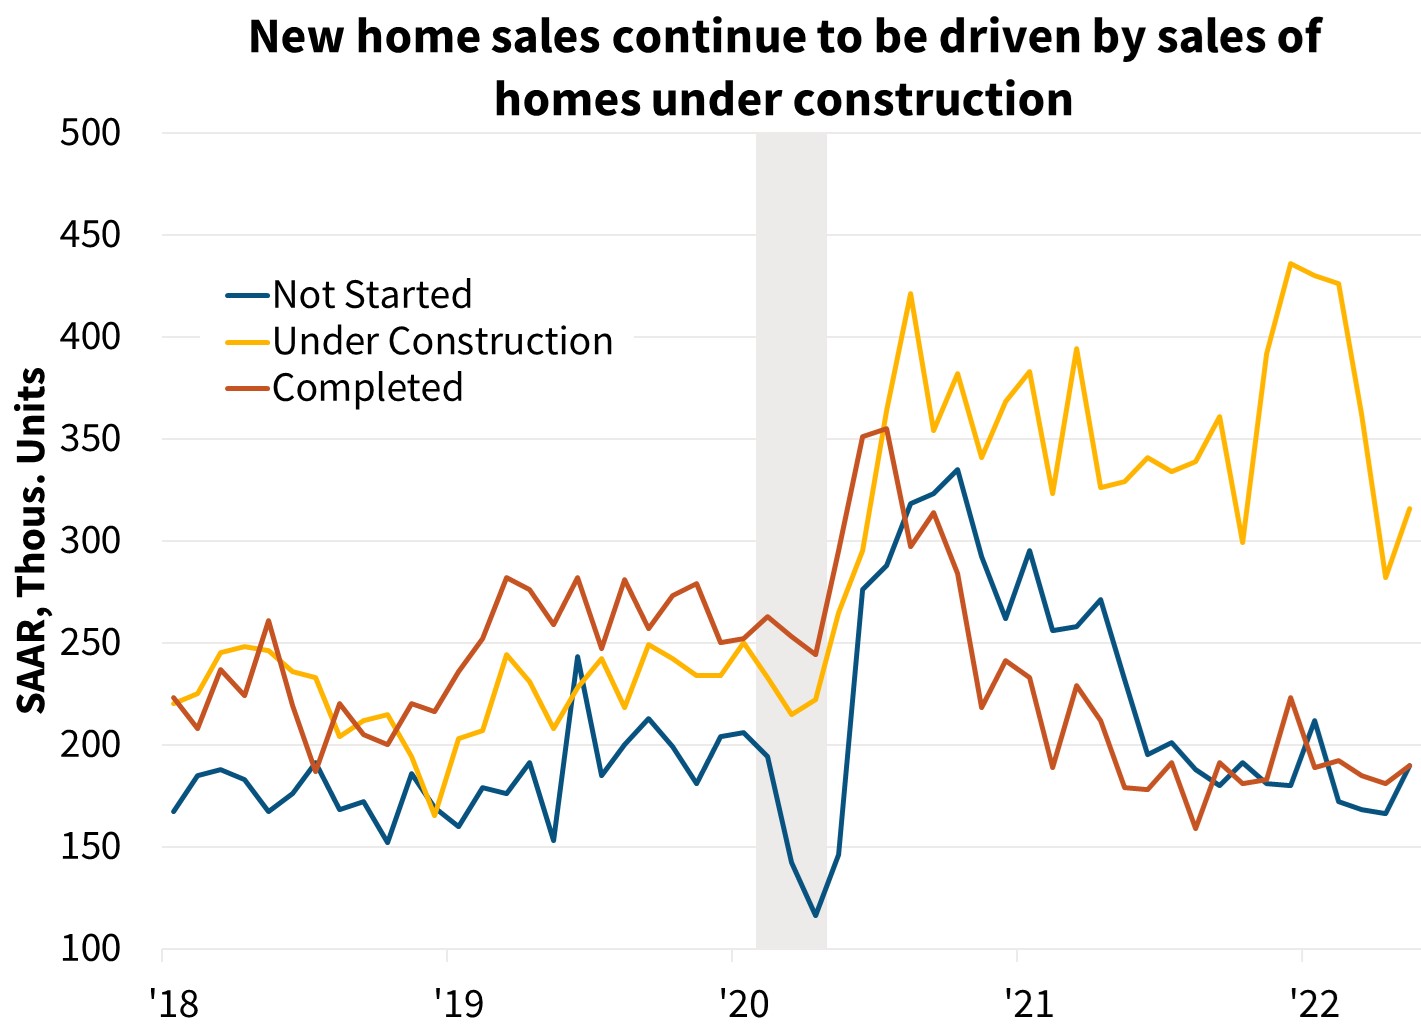  New home sales continue to be driven by sales of homes under construction